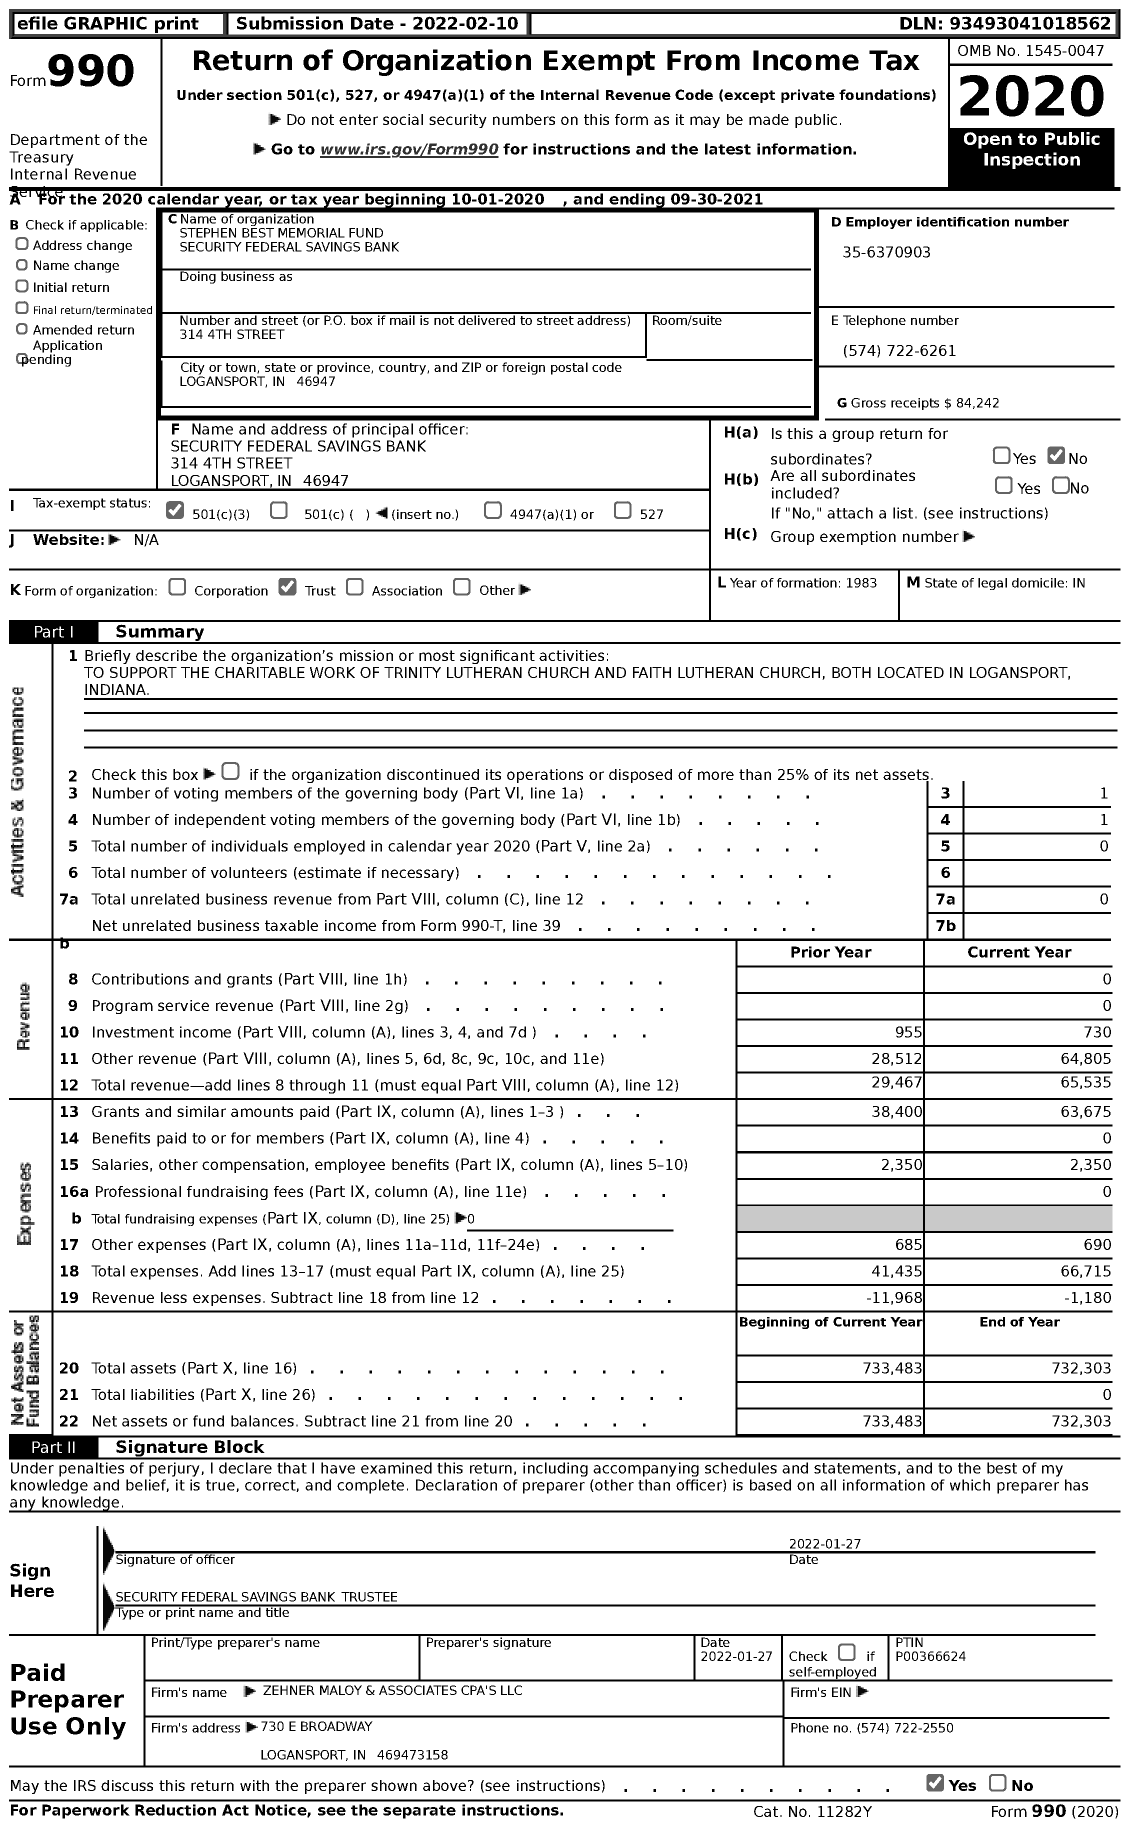 Image of first page of 2020 Form 990 for Stephen Best Memorial Fund Security Federal Savings Bank